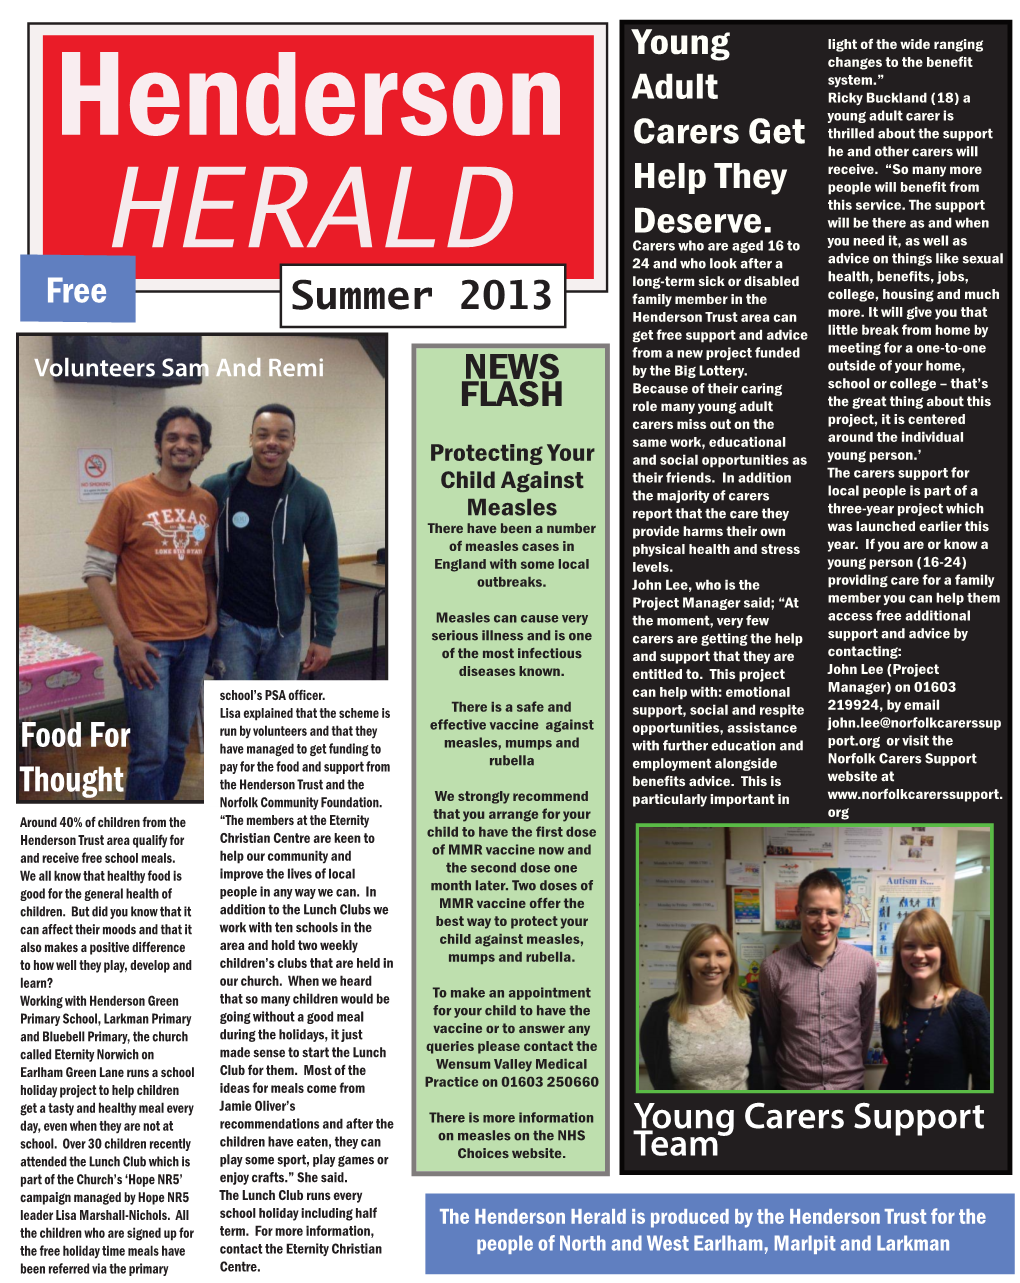 Henderson Herald Is Produced by the Henderson Trust for the the Children Who Are Signed up for Term